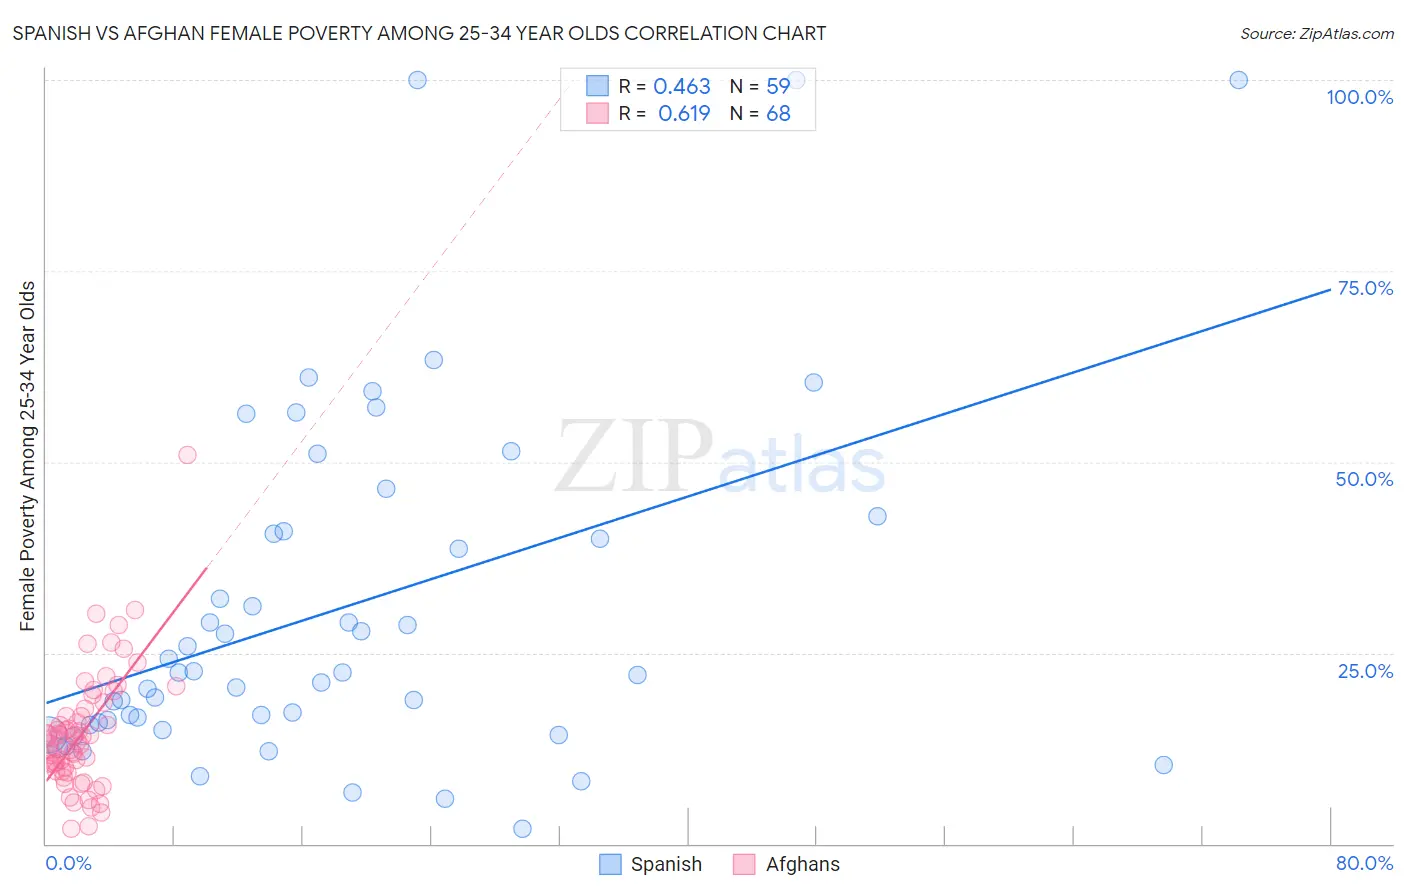 Spanish vs Afghan Female Poverty Among 25-34 Year Olds